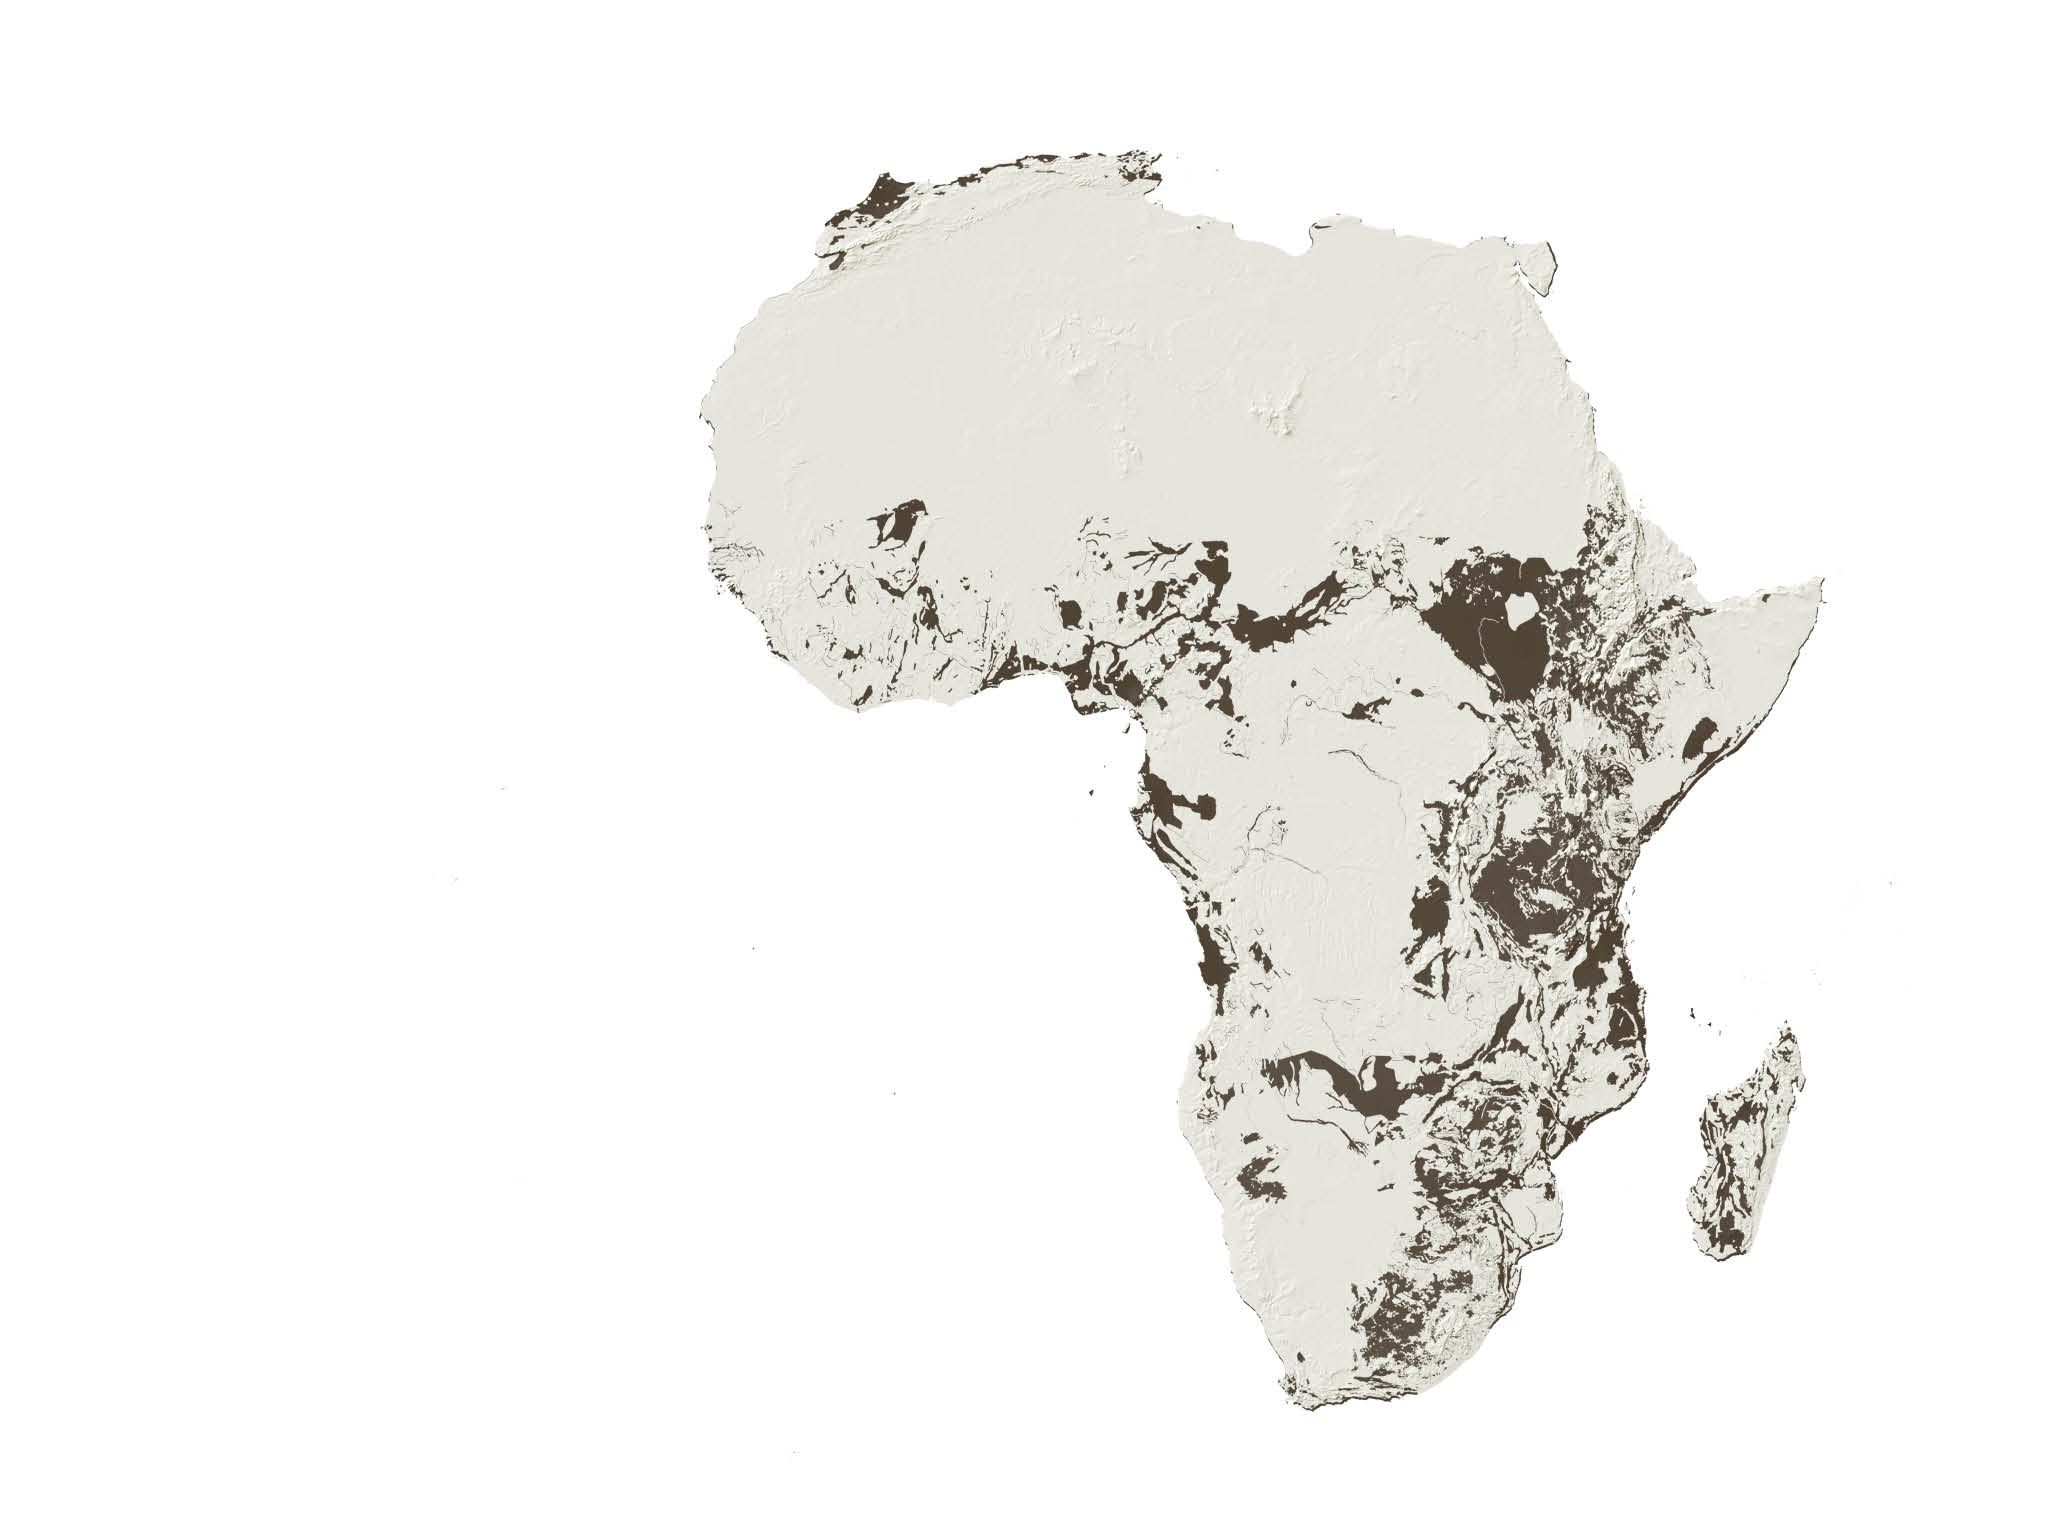 African Continent Wallpapers